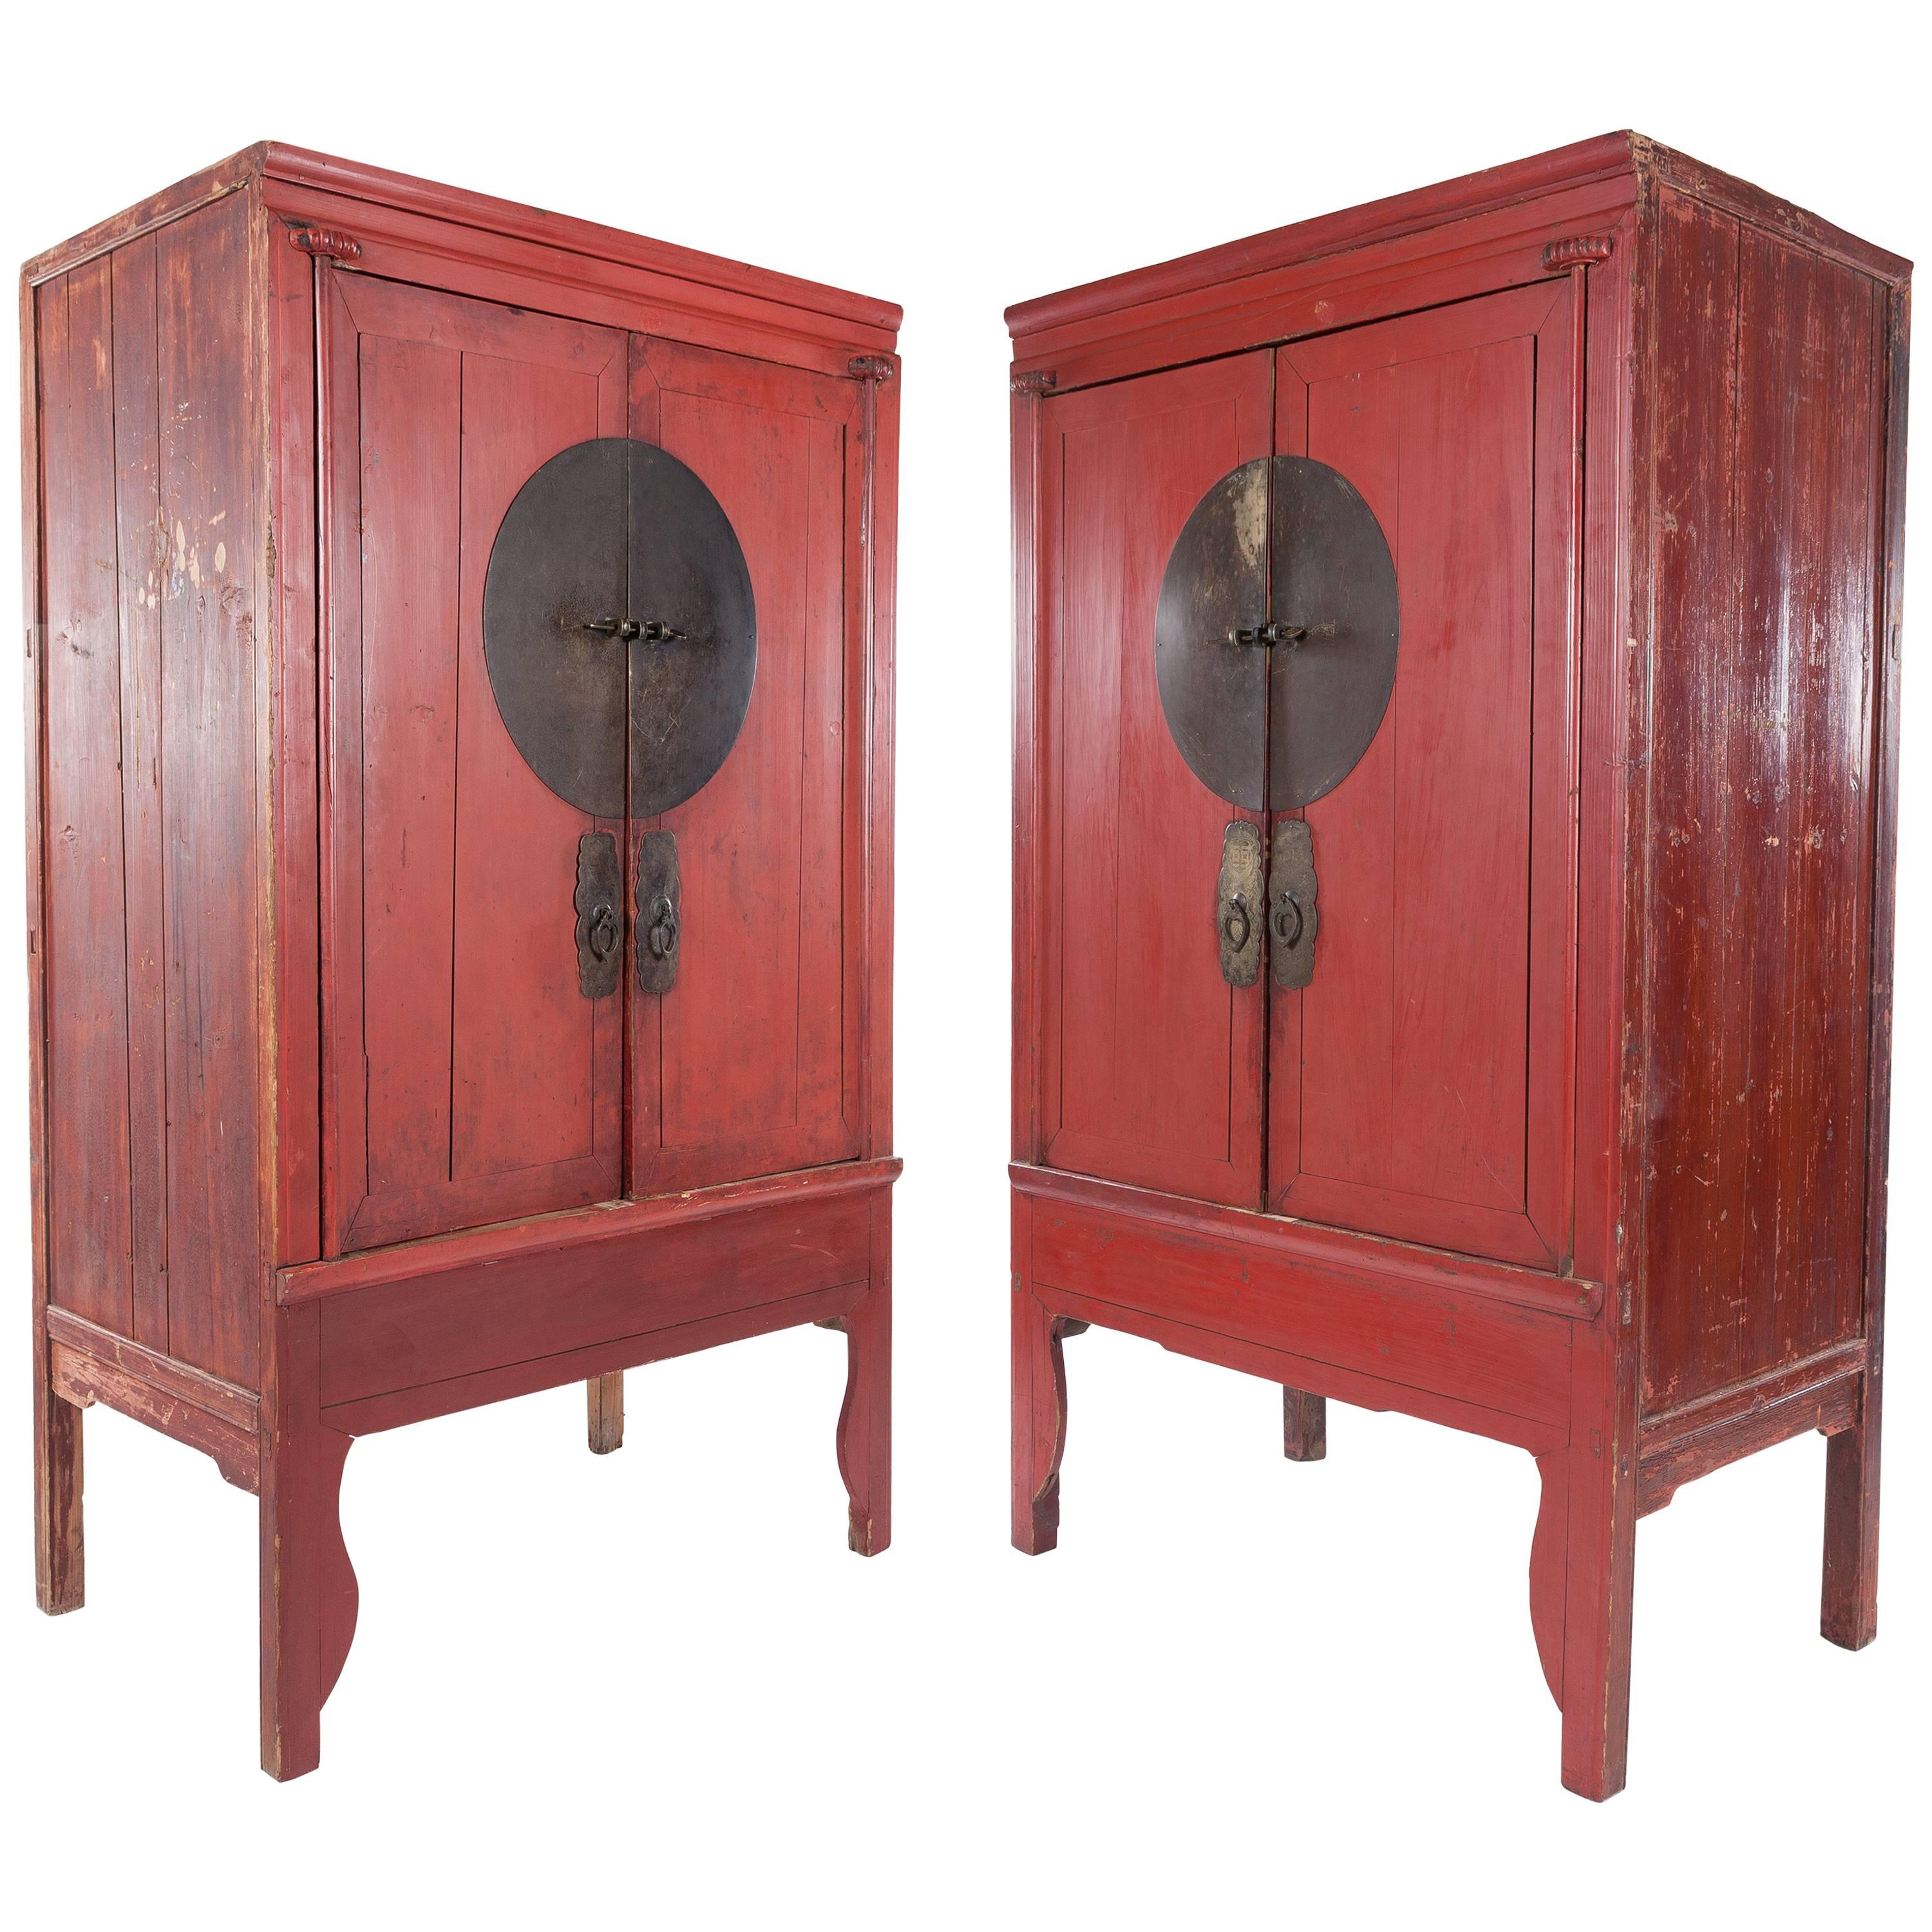 Pair of Antique Red Lacquer Ming-Style Chinese Wardrobe or Armoire Cabinets For Sale